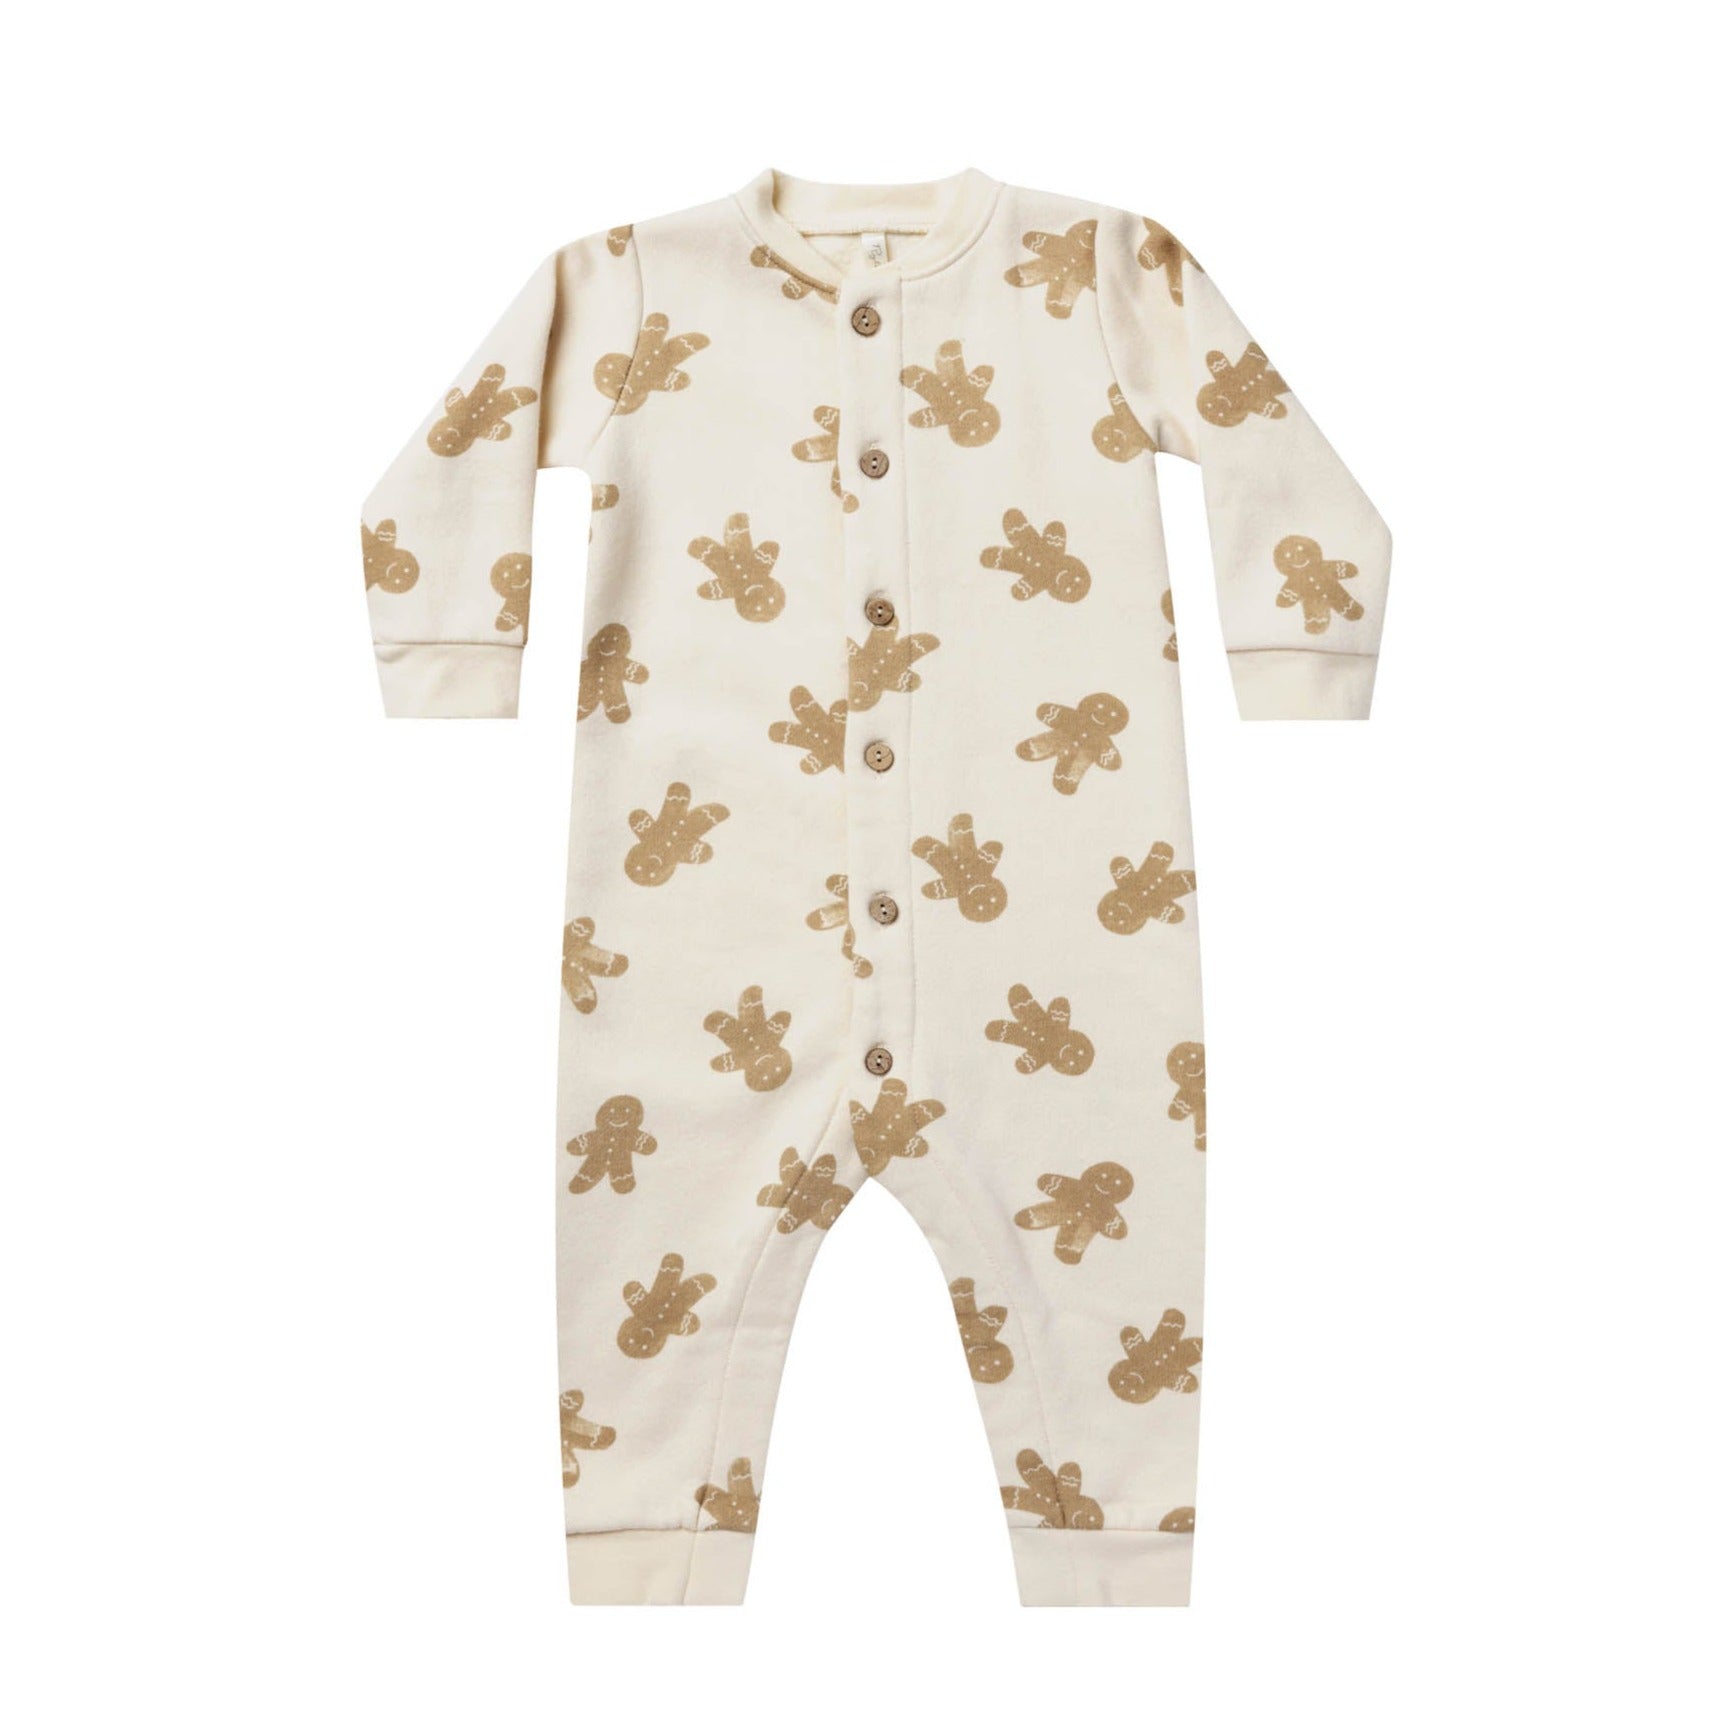 Gingerbread Baby Romper by Rylee and Cru at Bonjour Baby Baskets